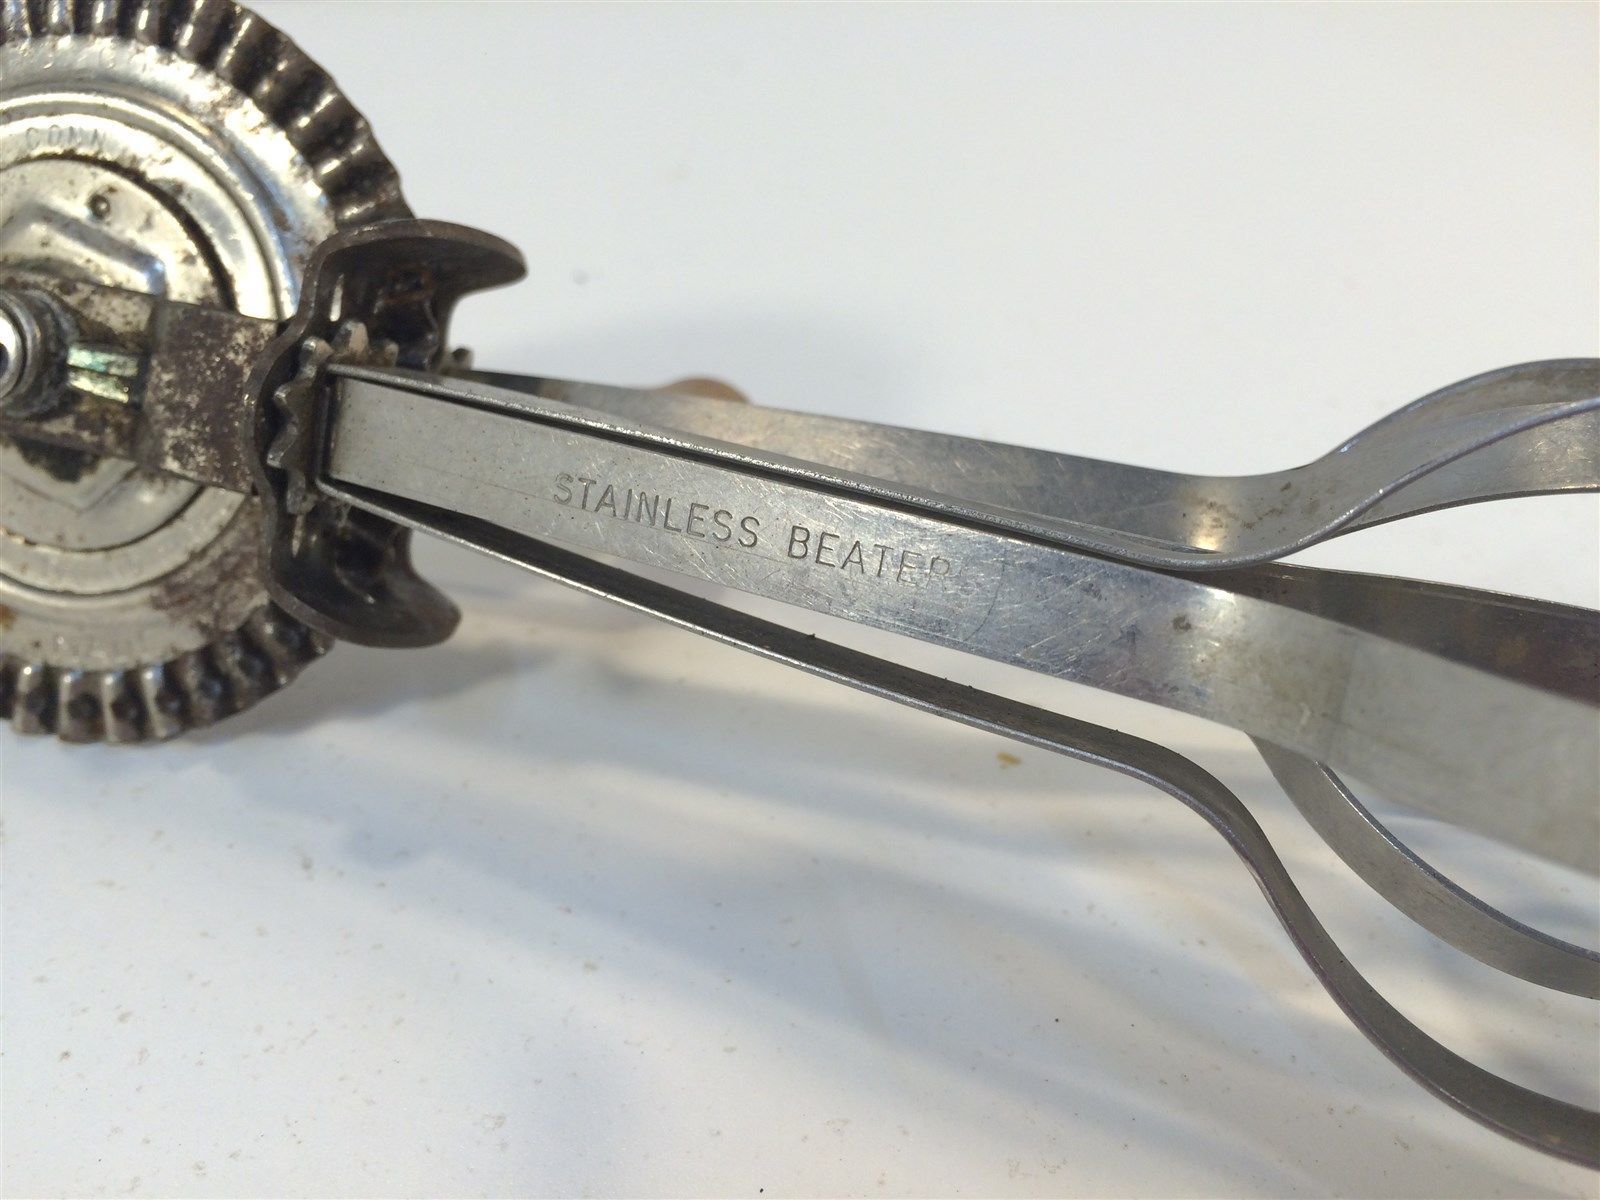 Vintage Taplin Rotary Egg Beater - Vintage Kitchen Tools - Stainless S